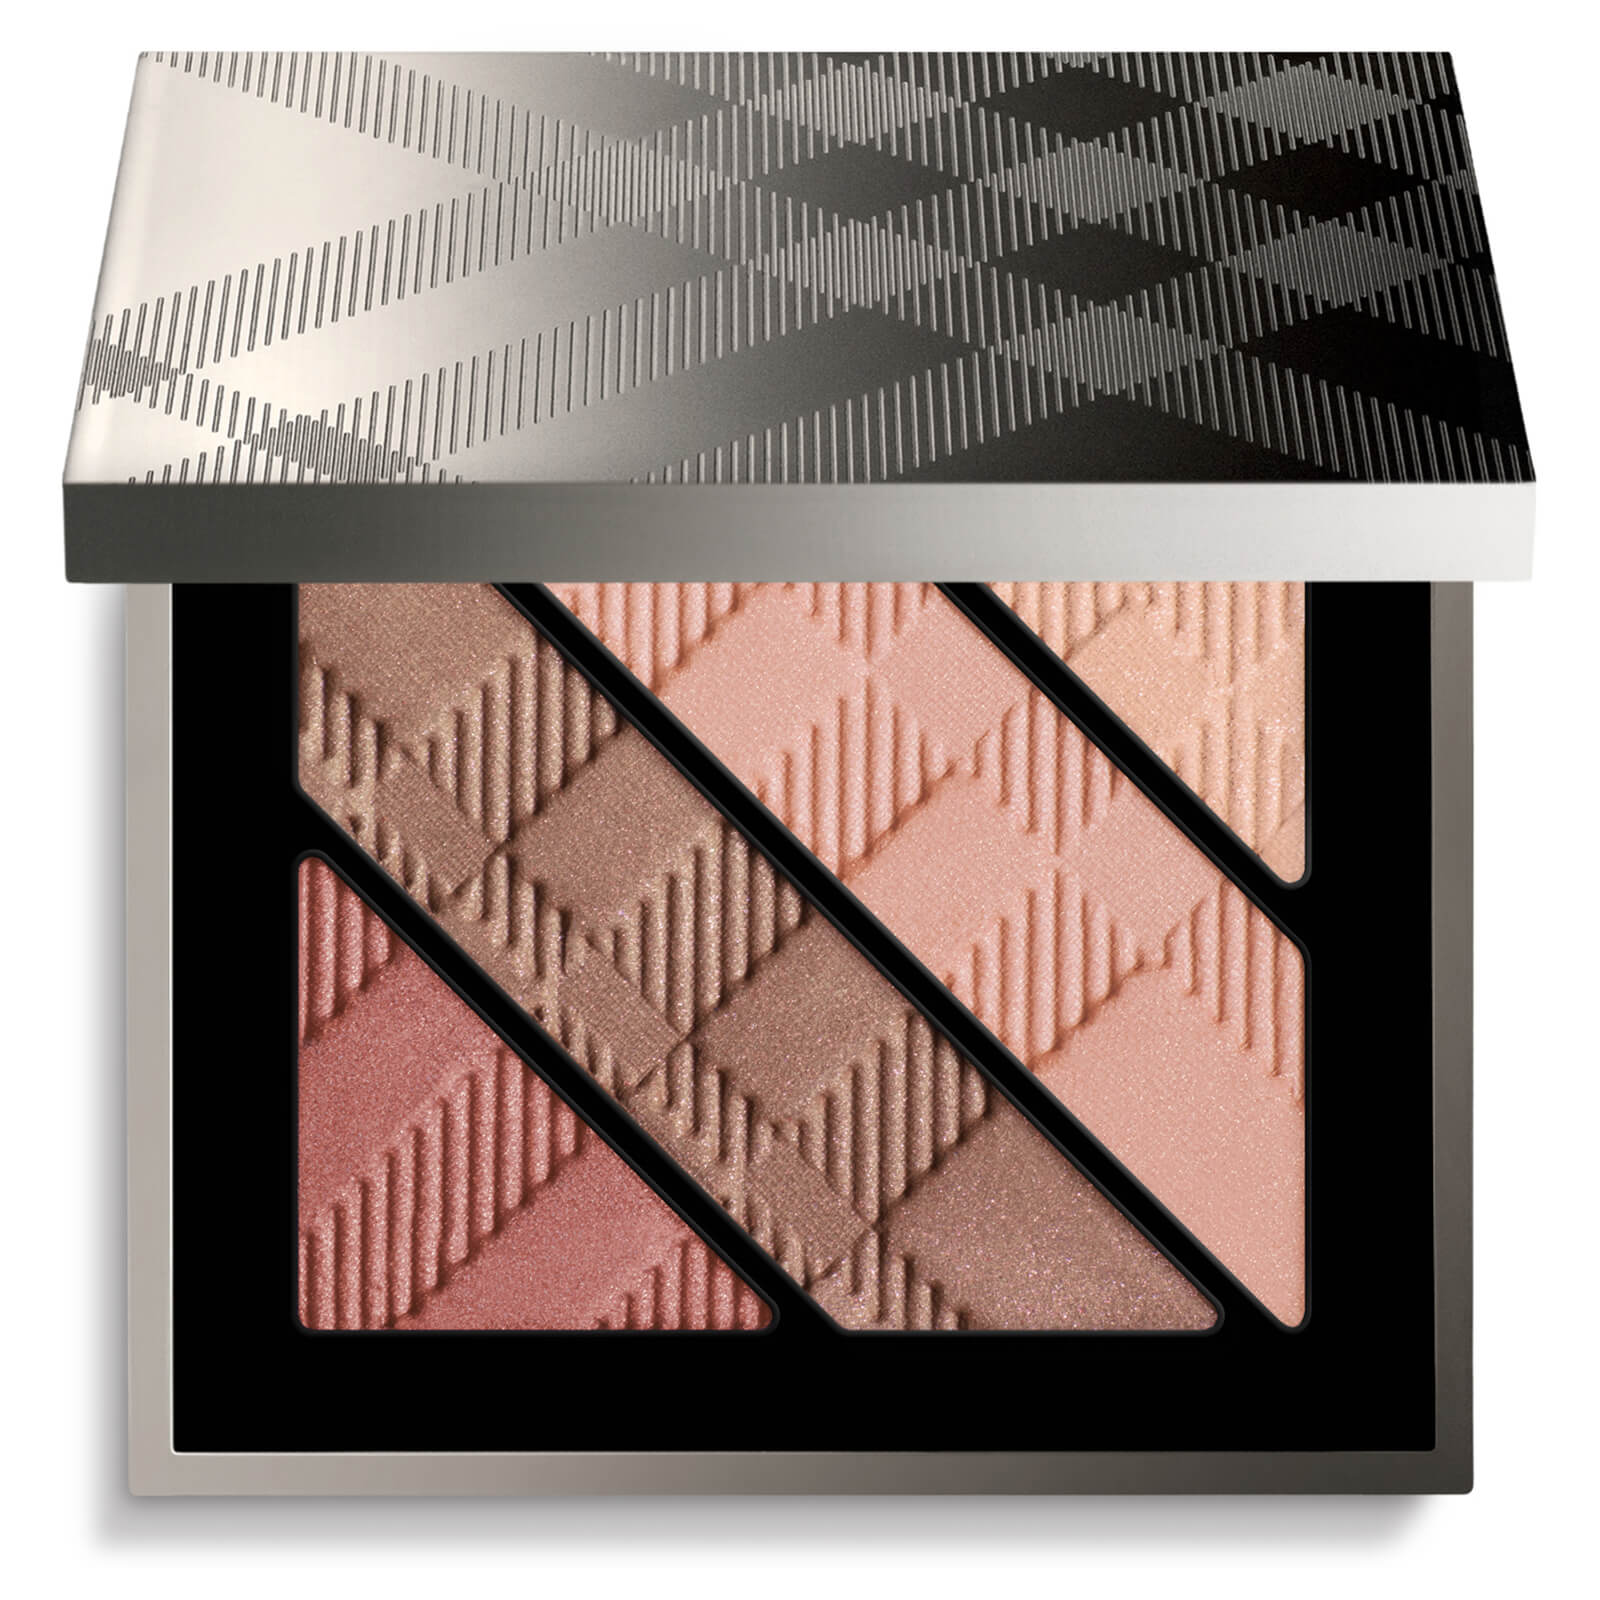 Burberry Complete Eye Palette - Rose 